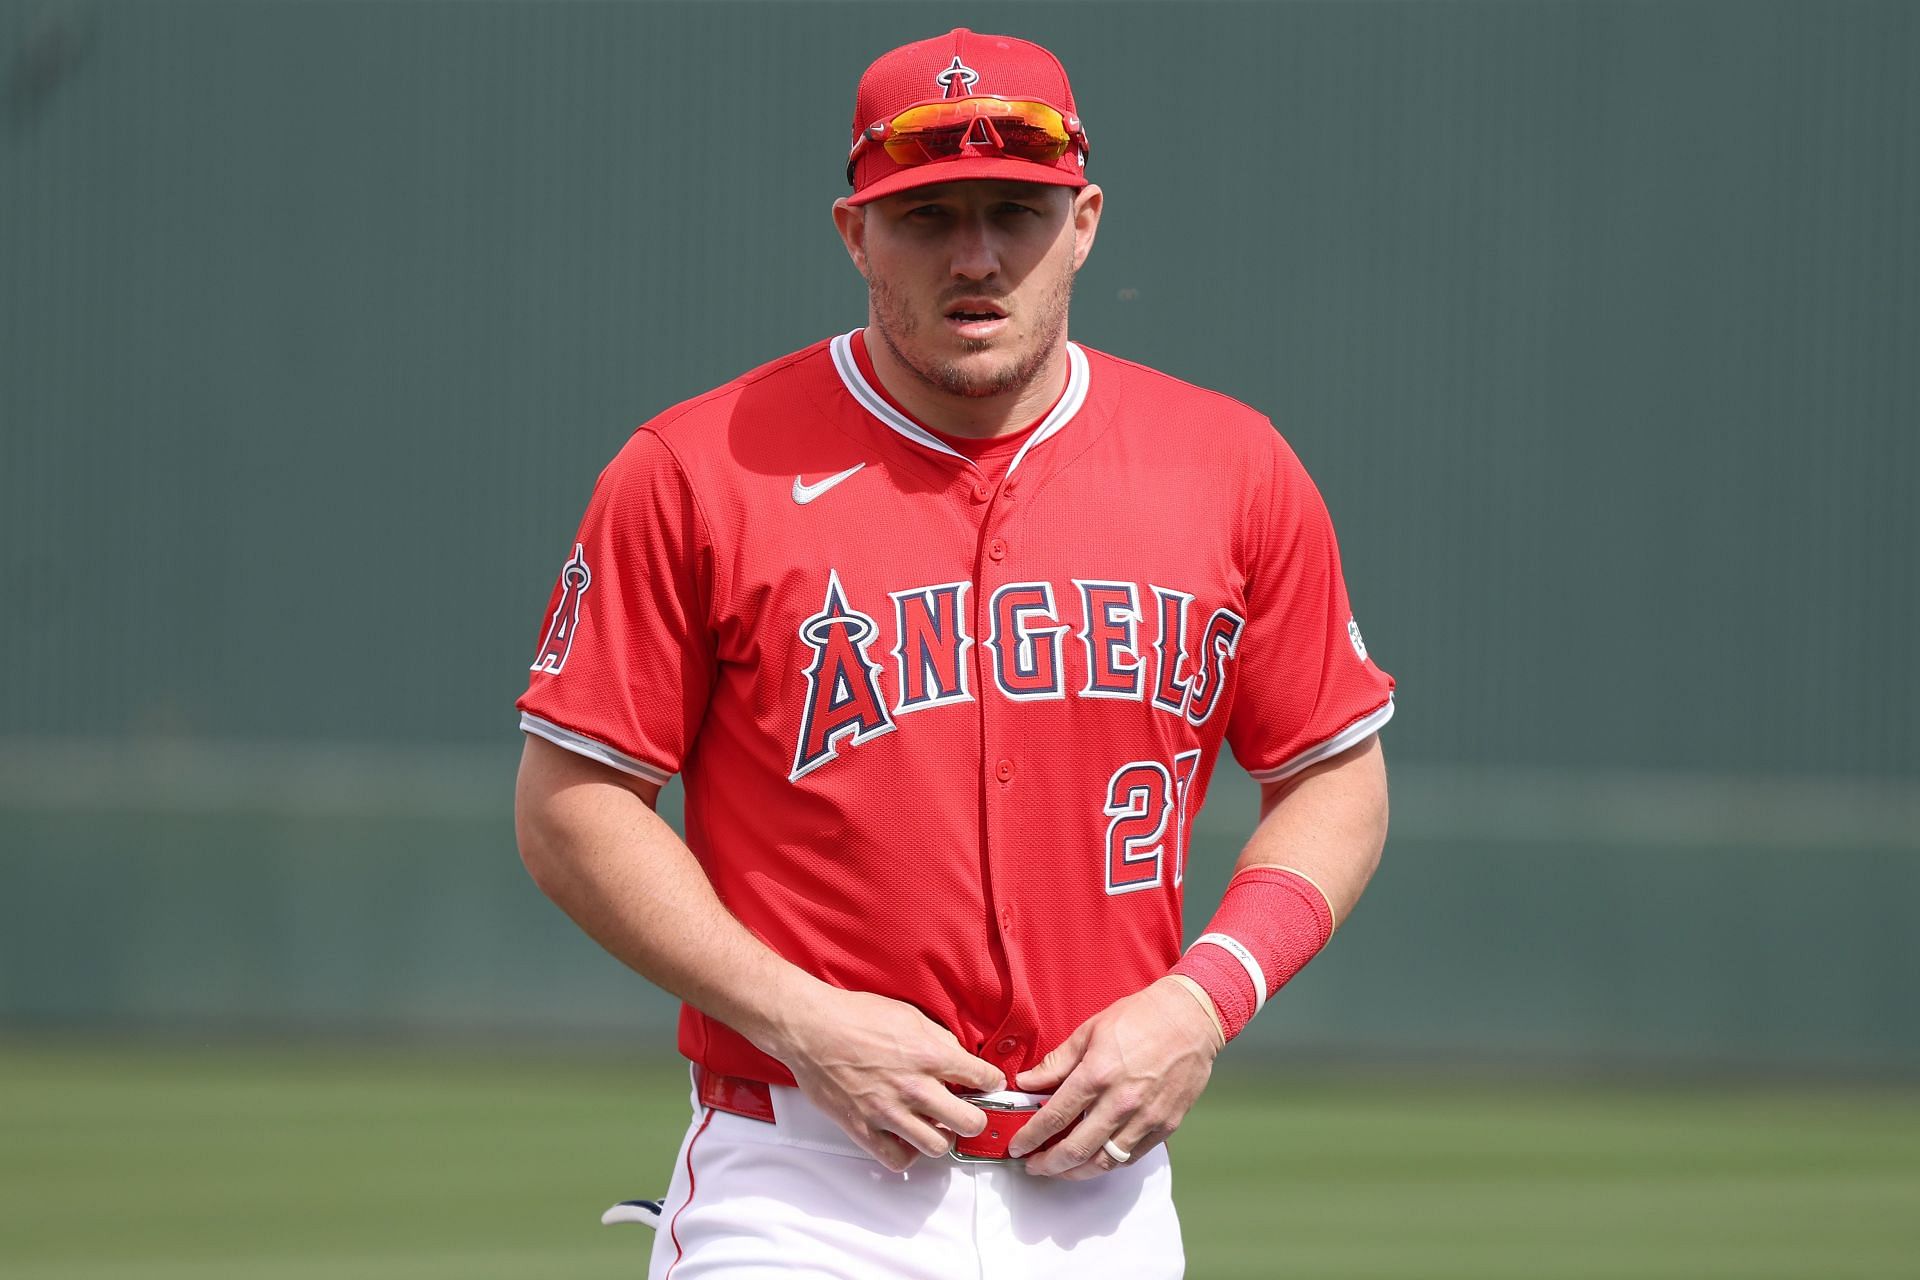 Mike Trout honors late brother-in-law by wearing his name on jersey